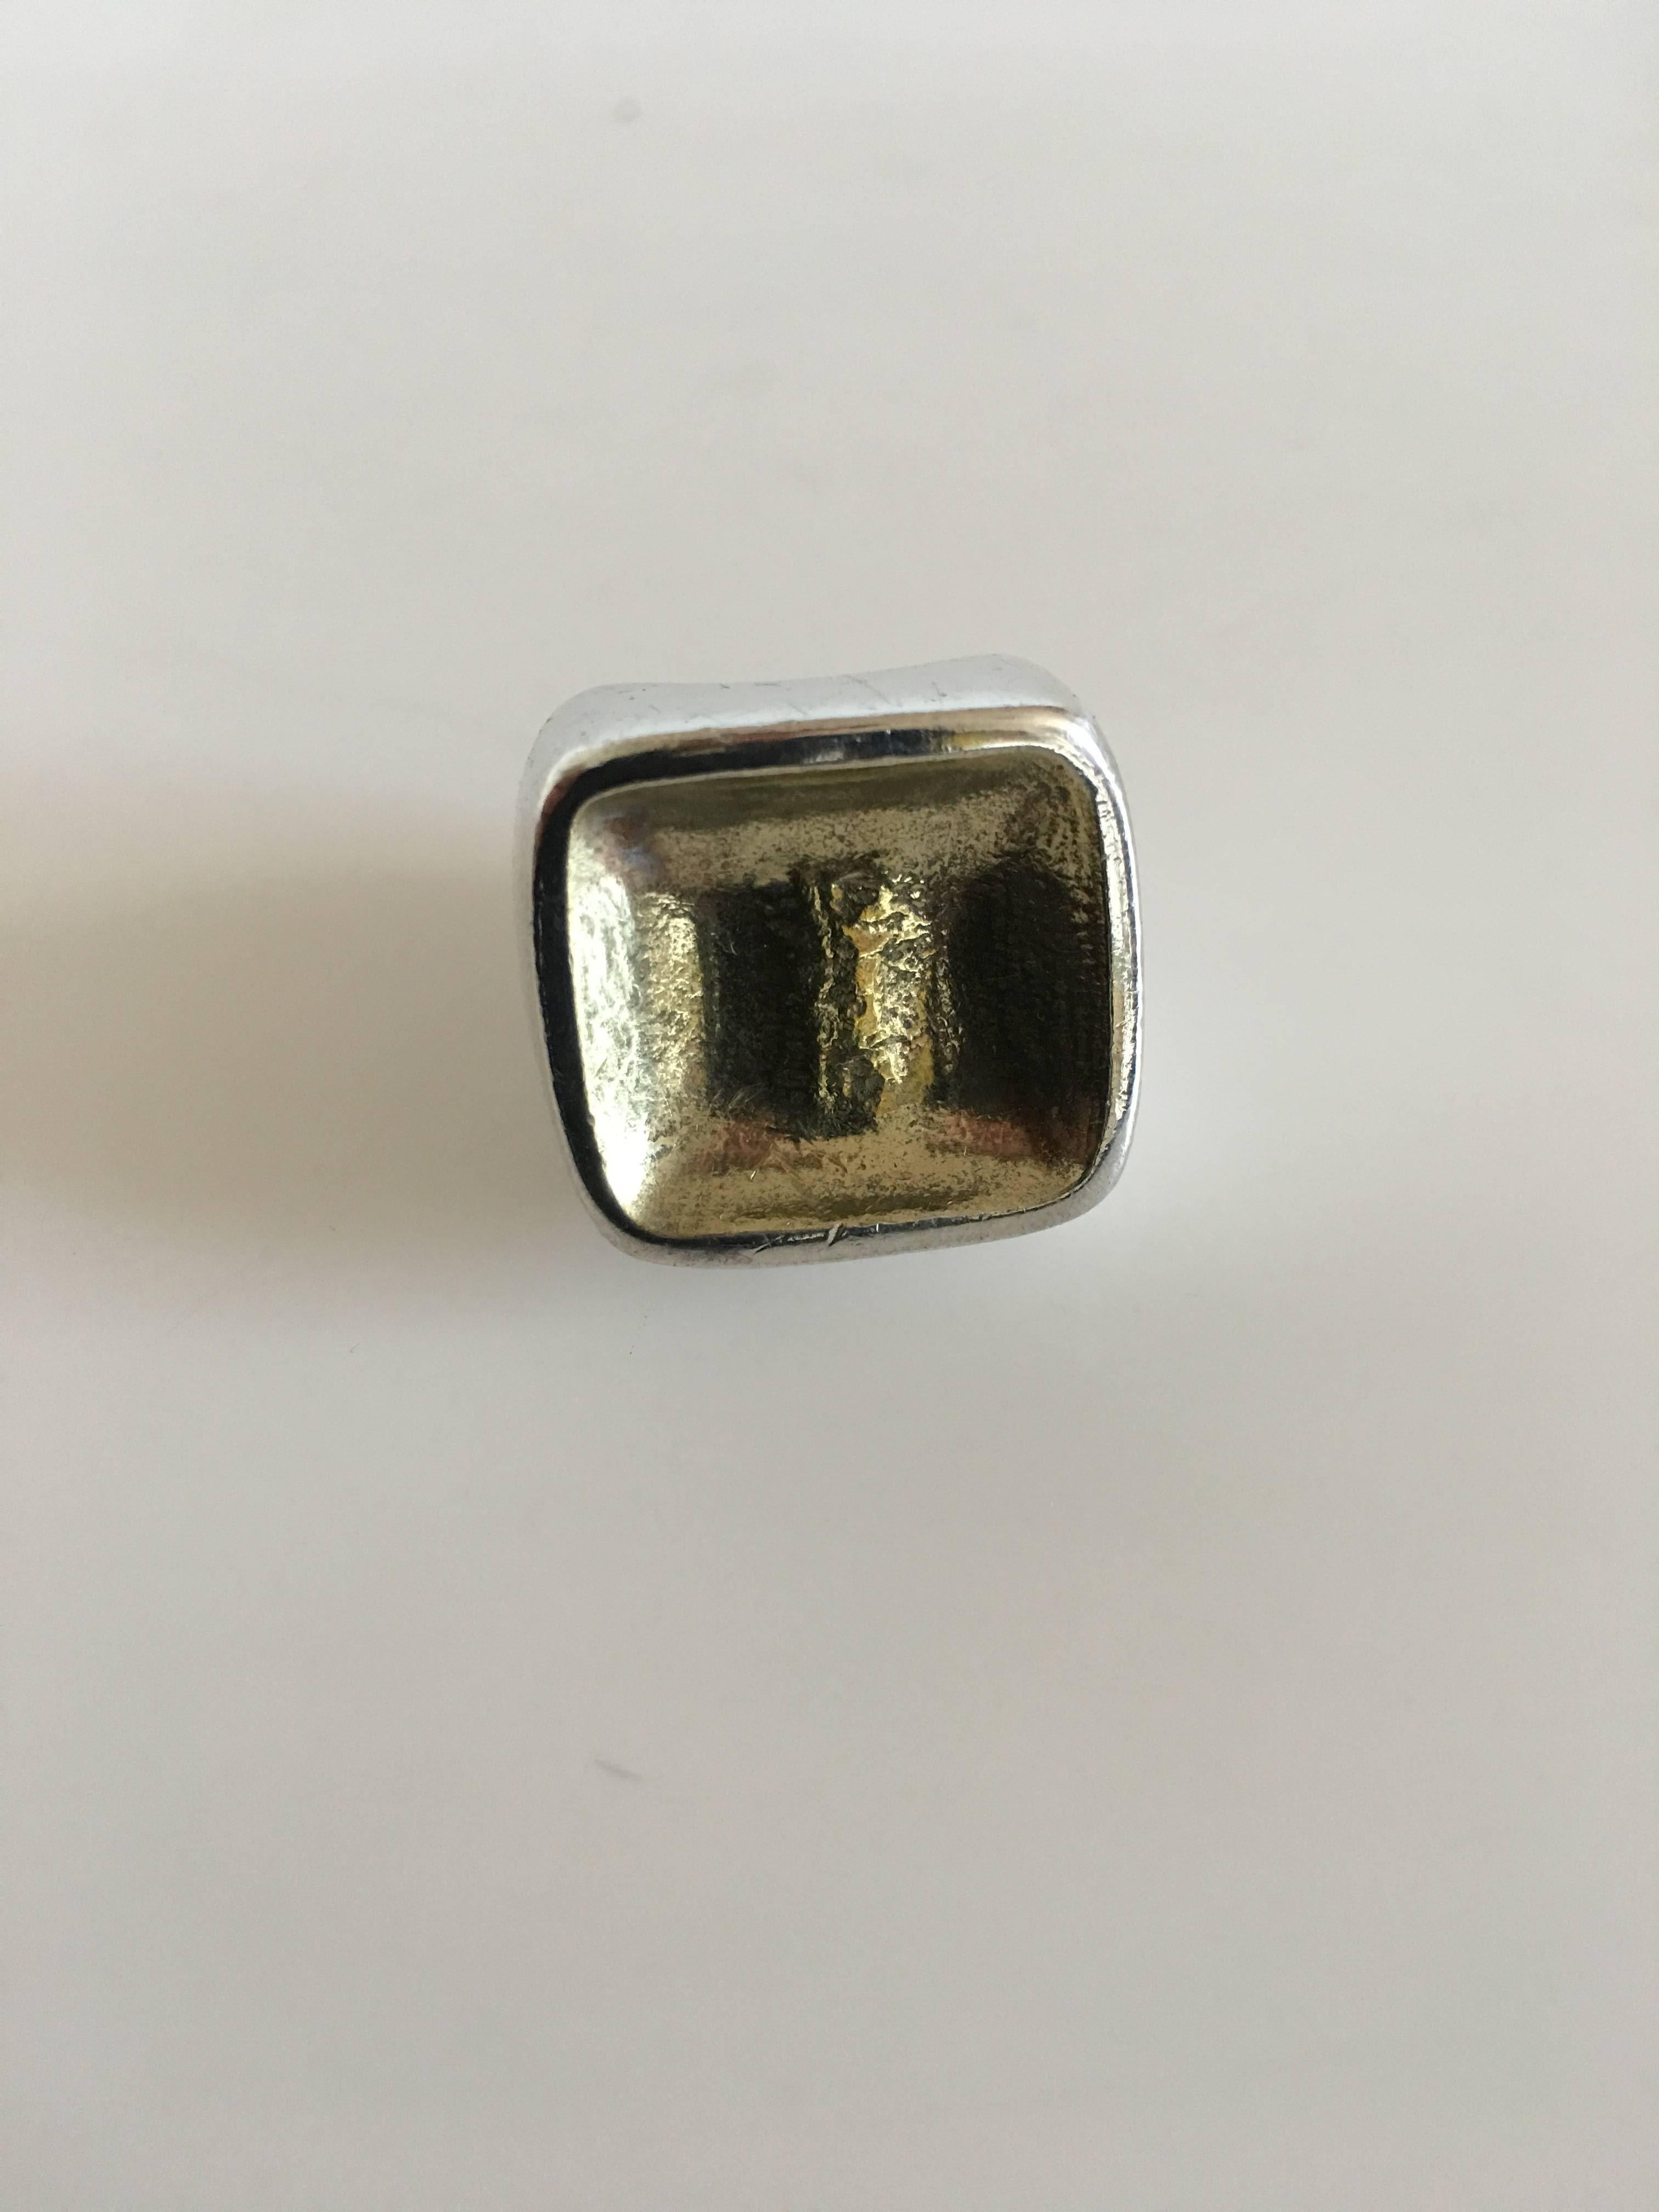 Hans Hansen sterling silver ring with gilded top. Size 53 (US Size 6½). Weighs 25 grams (0.80 oz). Measures 2 x 2 cm (0 25/32